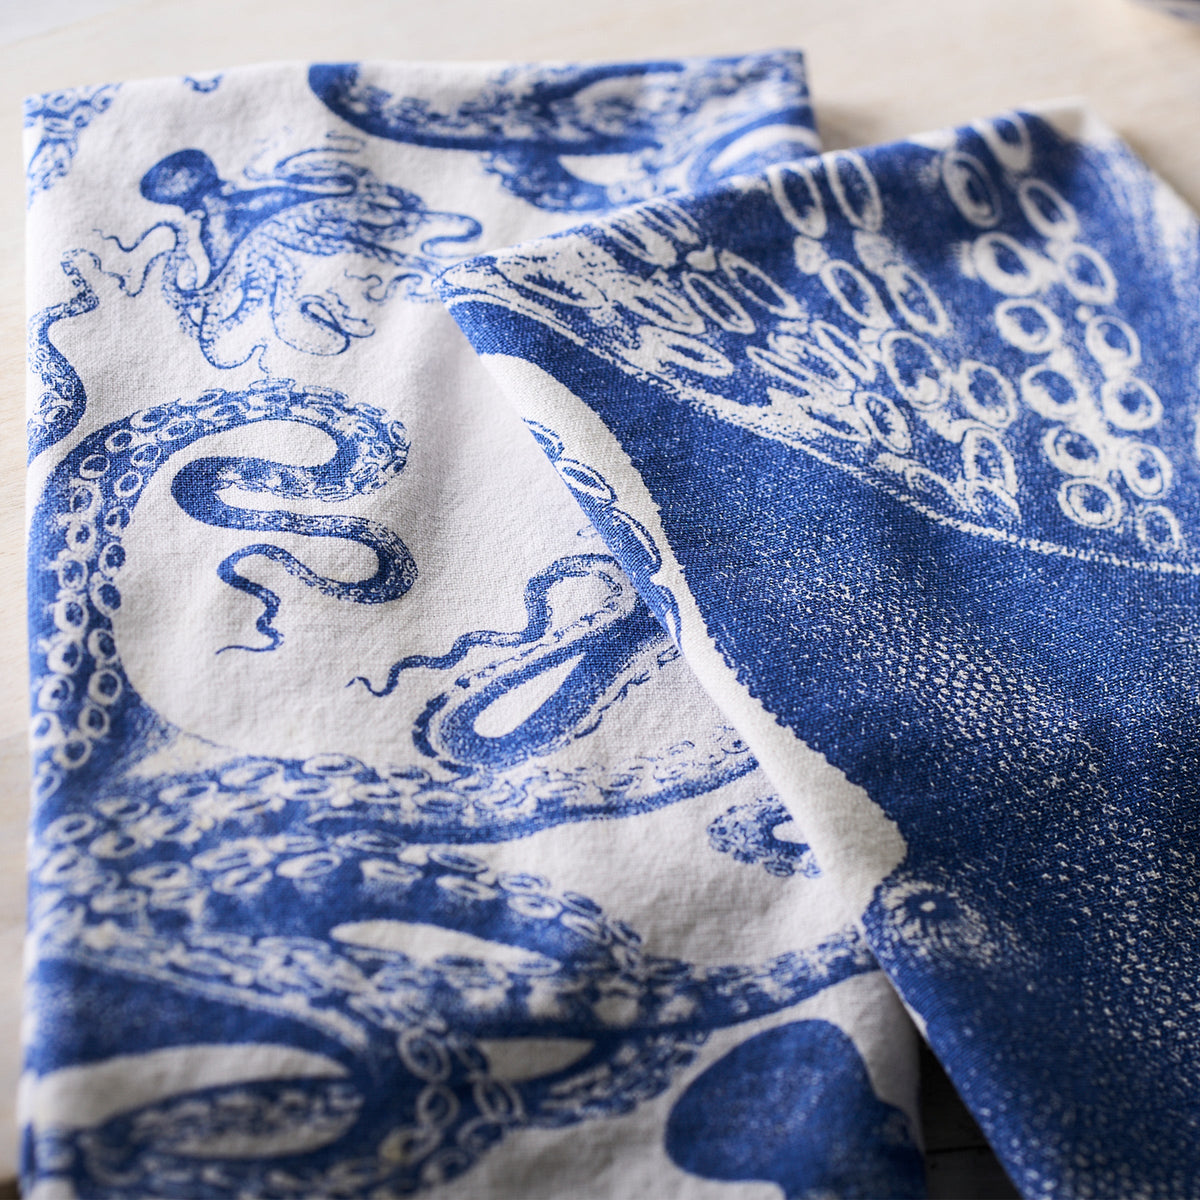 Two white cotton tea towels featuring intricate blue designs of octopus tentacles and sea creatures, laid flat on a surface. These kitchen companions add a touch of marine elegance to any culinary space. Introducing the Lucy Kitchen Towels, Set of 2 by Caskata.